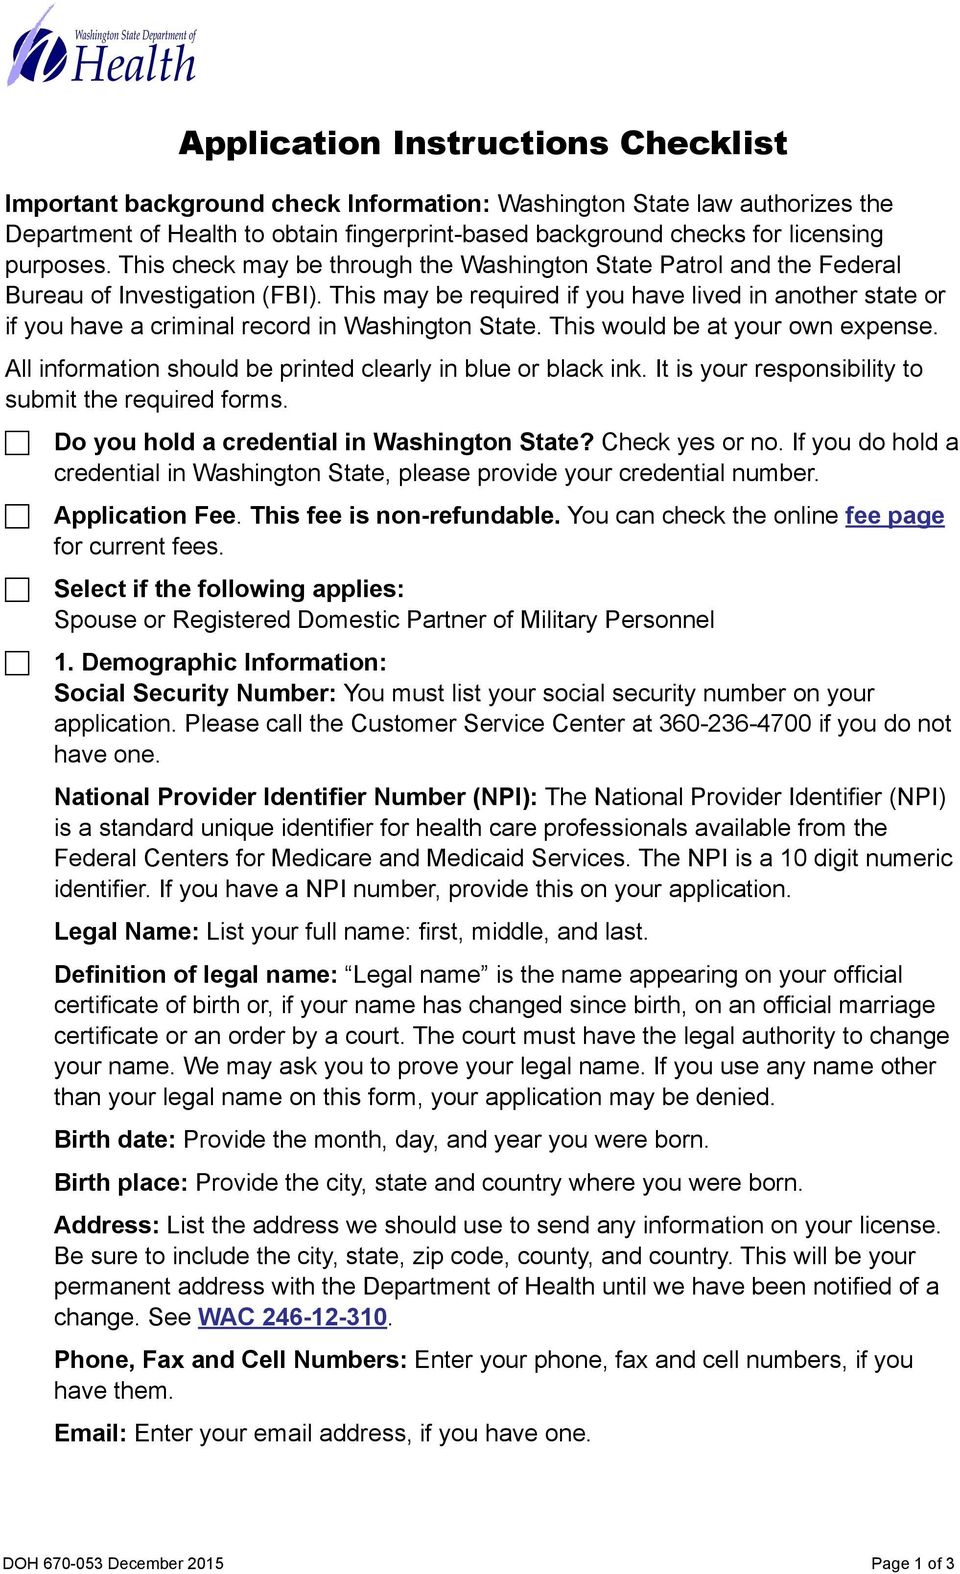 This may be required if you have lived in another state or if you have a criminal record in Washington State. This would be at your own expense.